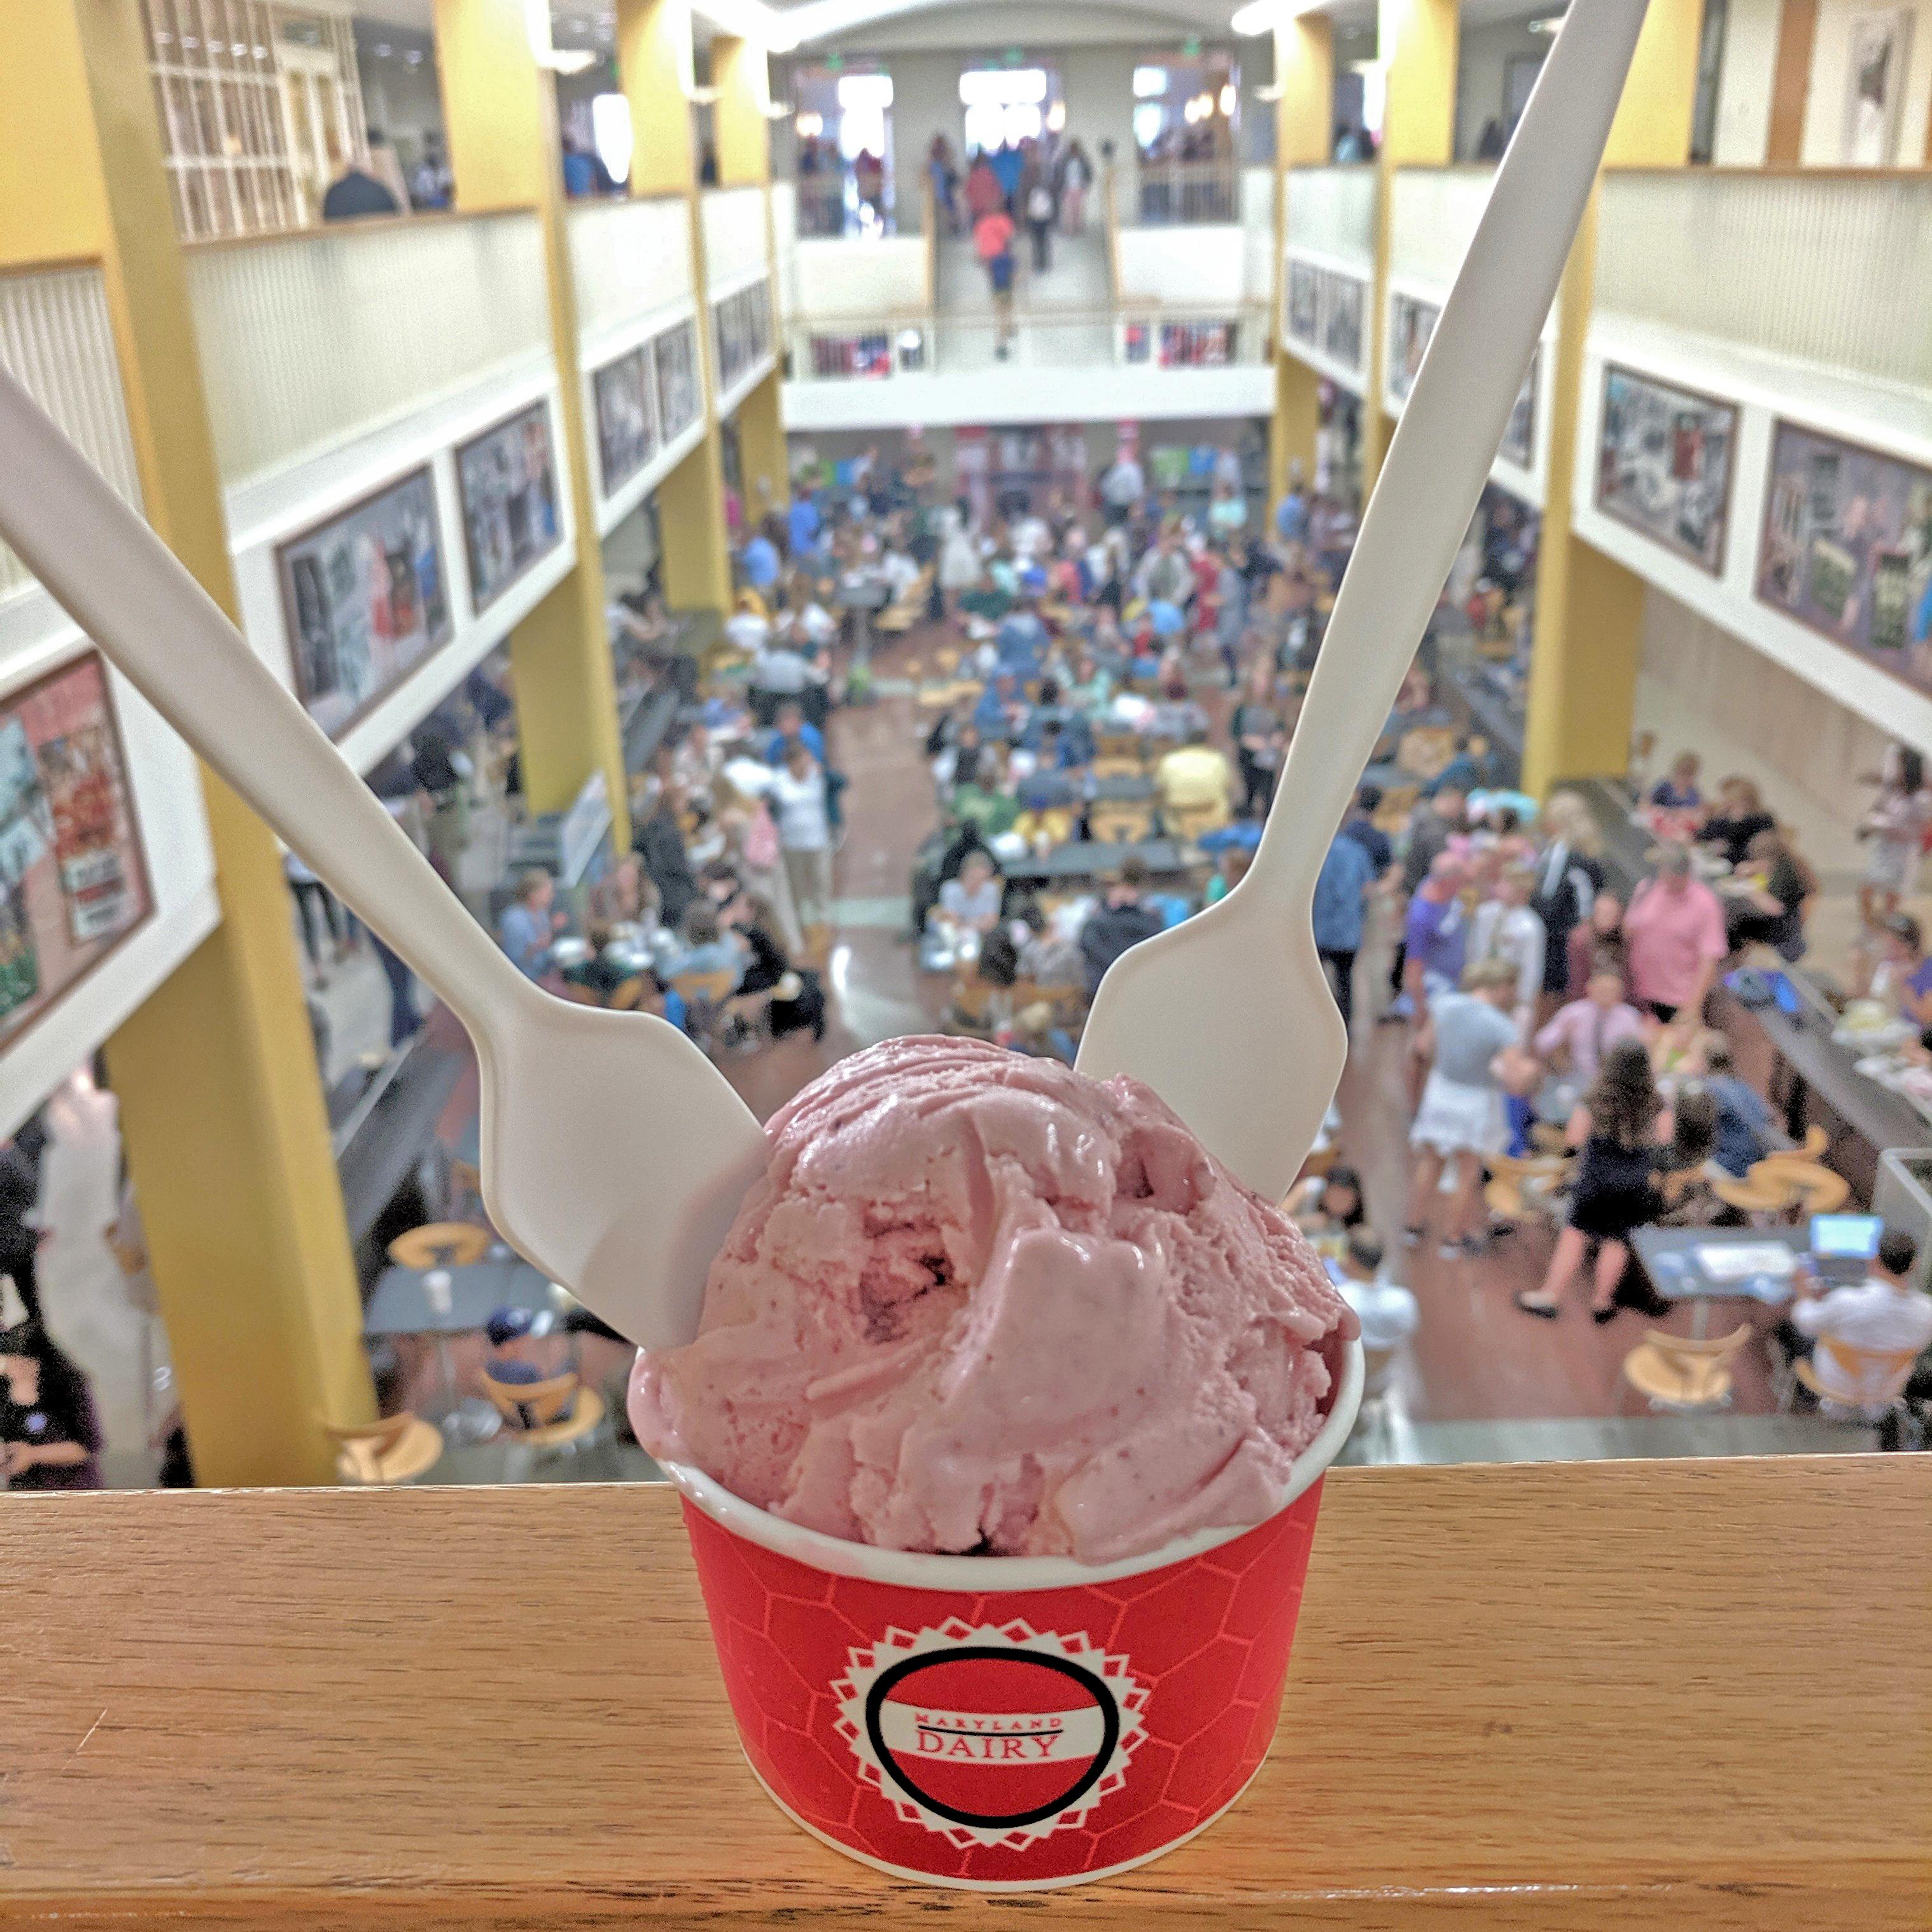 A MD Dairy Ice cream scoop looking over stamp food court